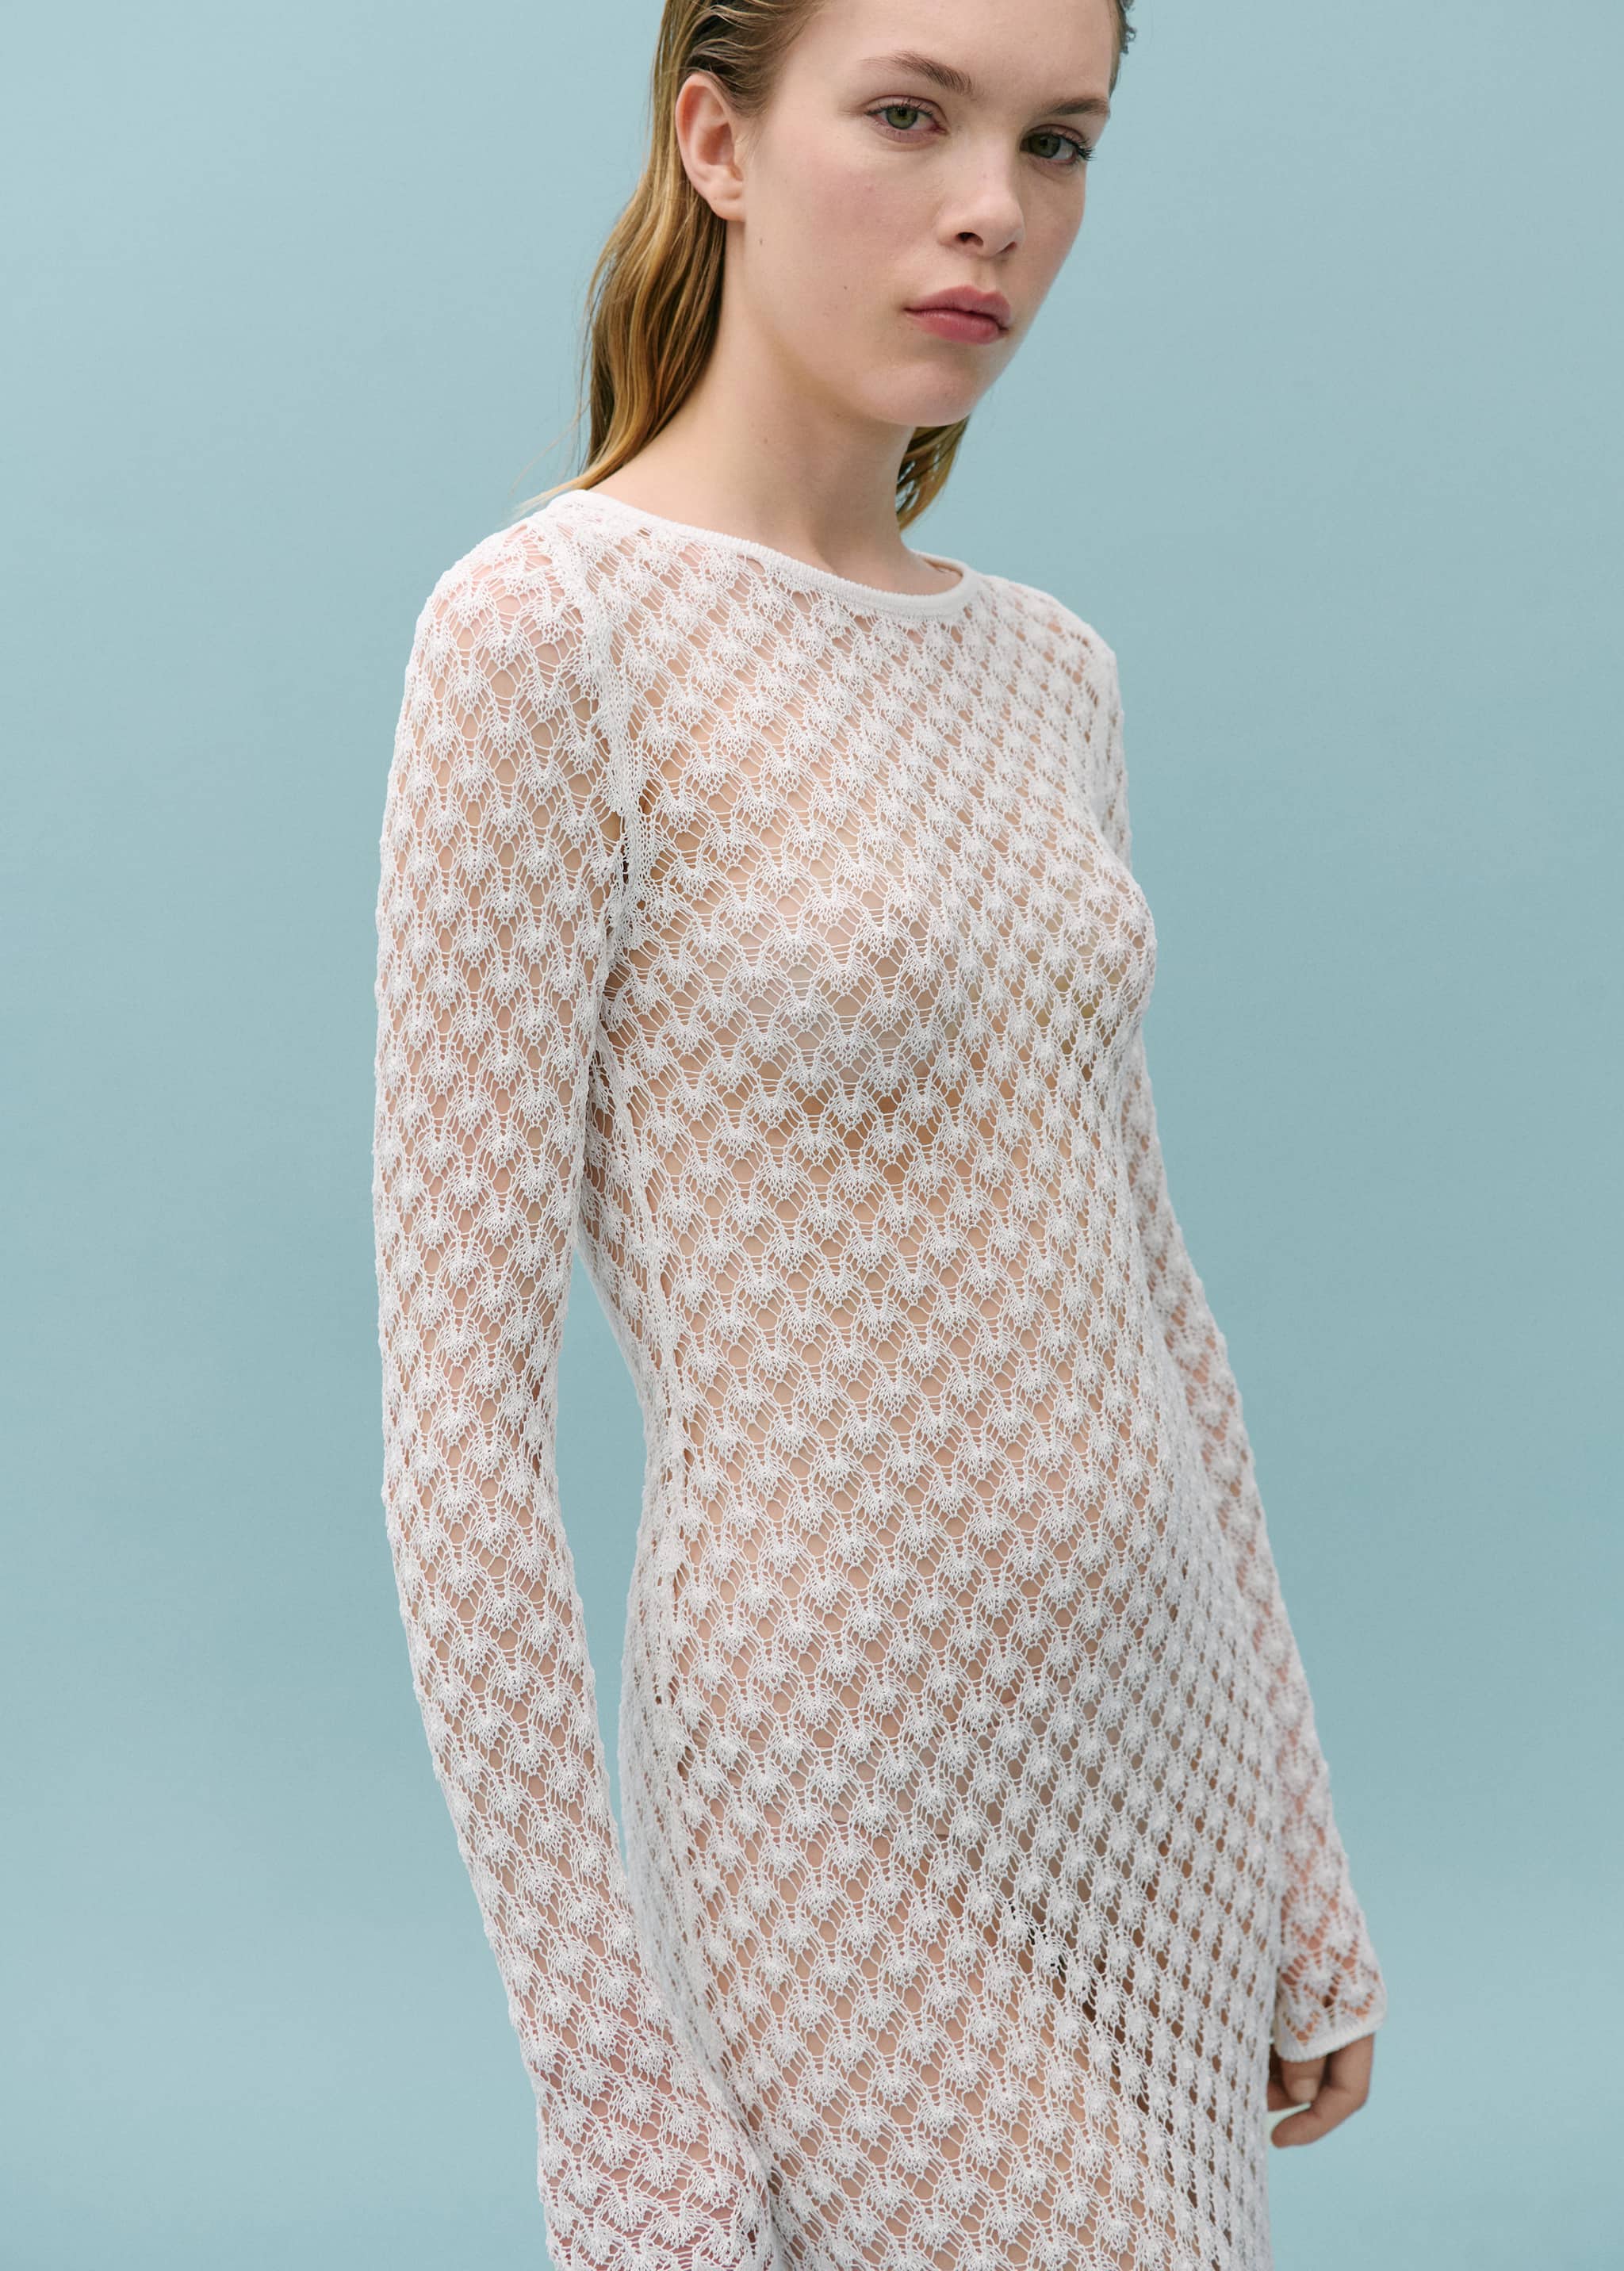 Crochet dress with open back - Details of the article 1